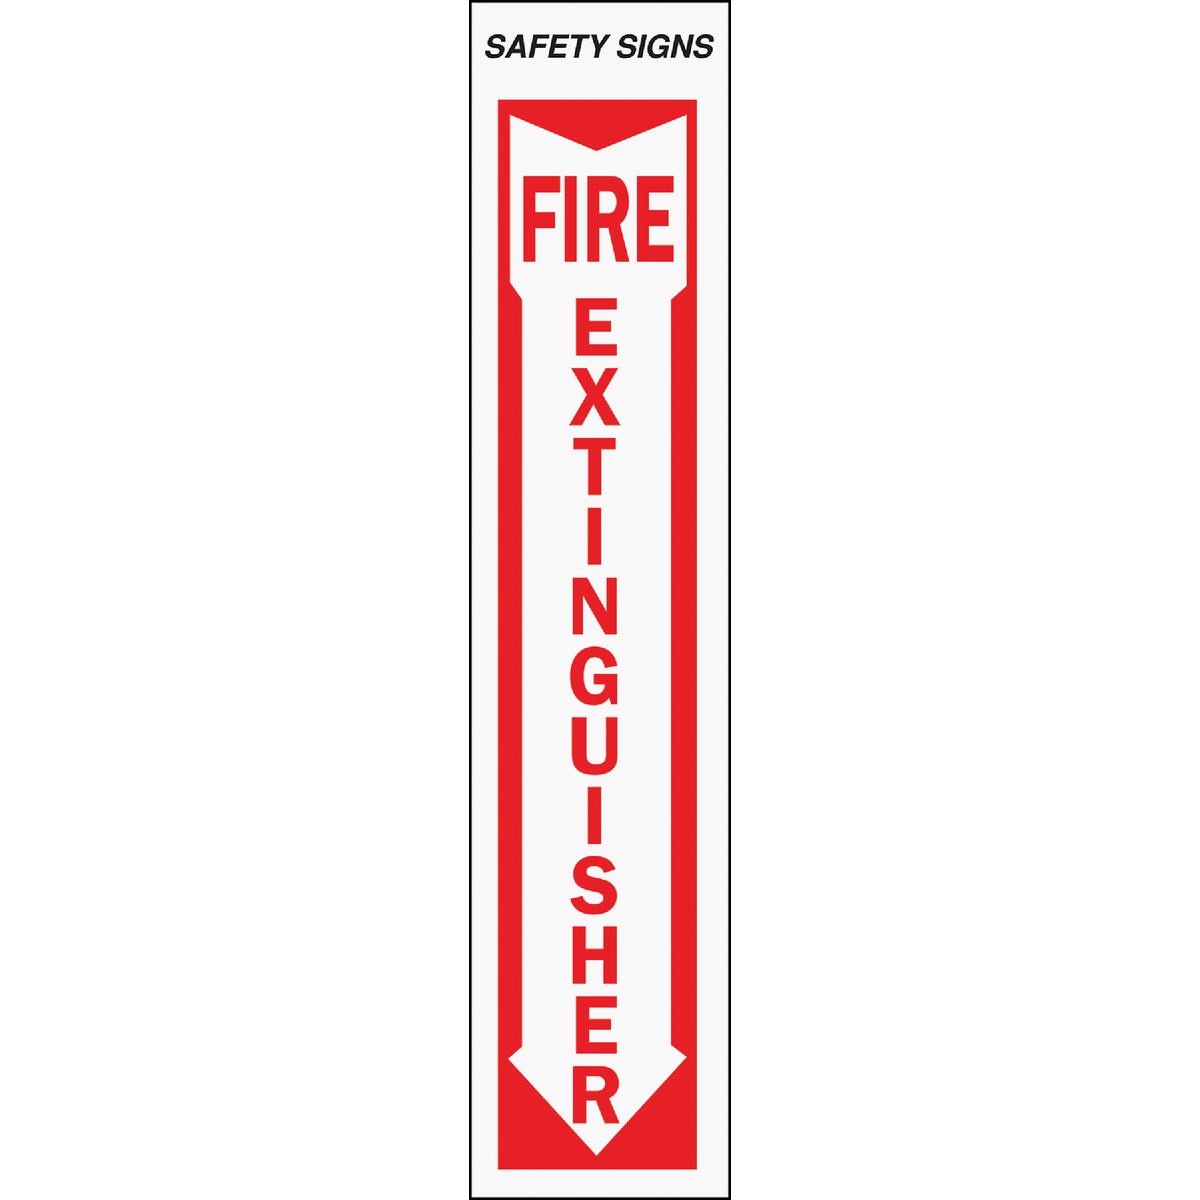 Item 242985, Fire Extinguisher Sign features durable plastic that is UV-resistant, ideal